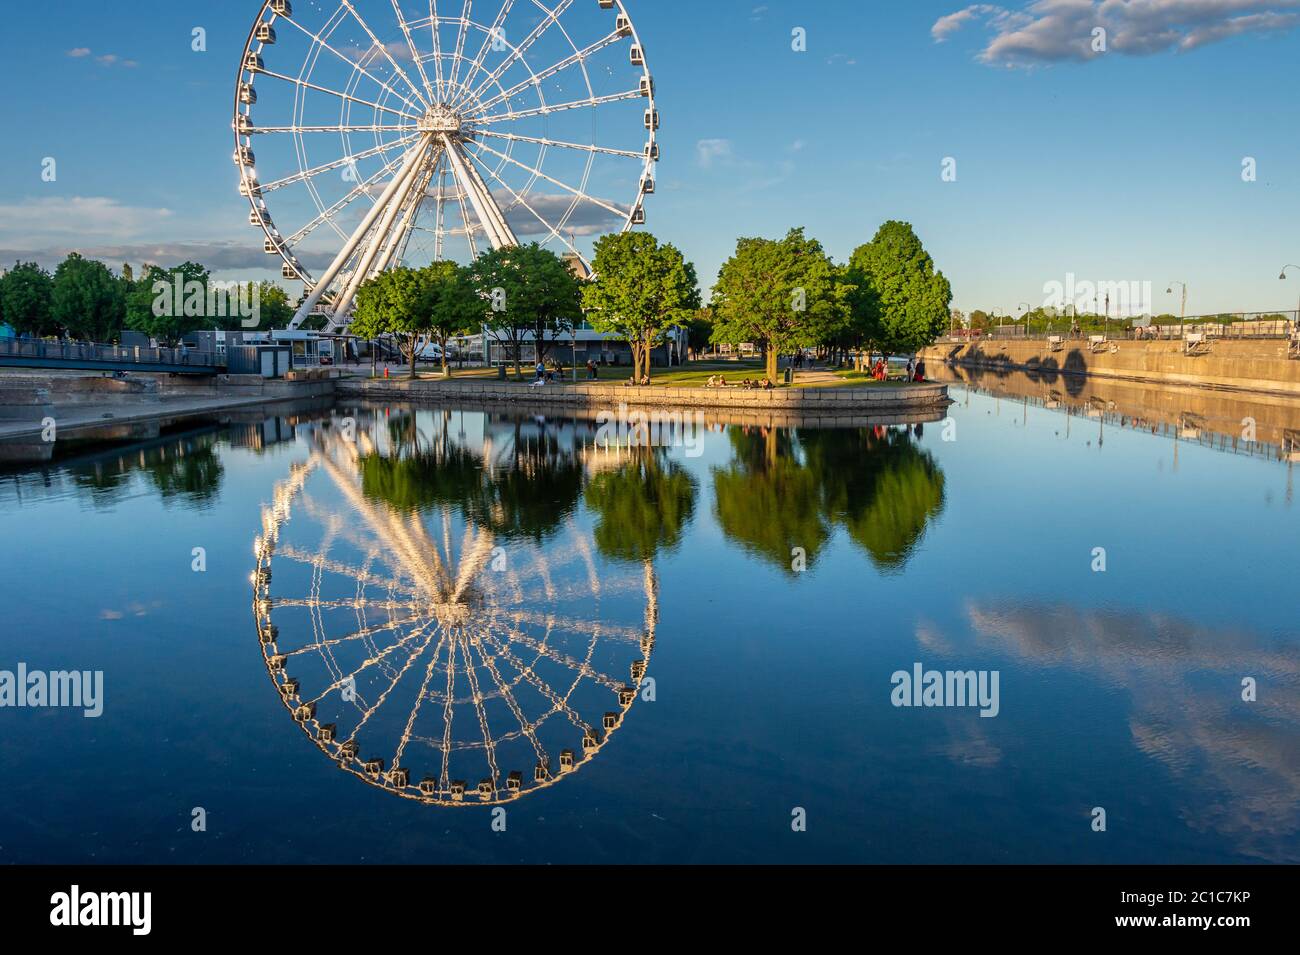 Montreal, Canada - 14 June 2020: The Montreal Observation Wheel (Grande Roue de Montreal) in the Old Port of Montreal Stock Photo